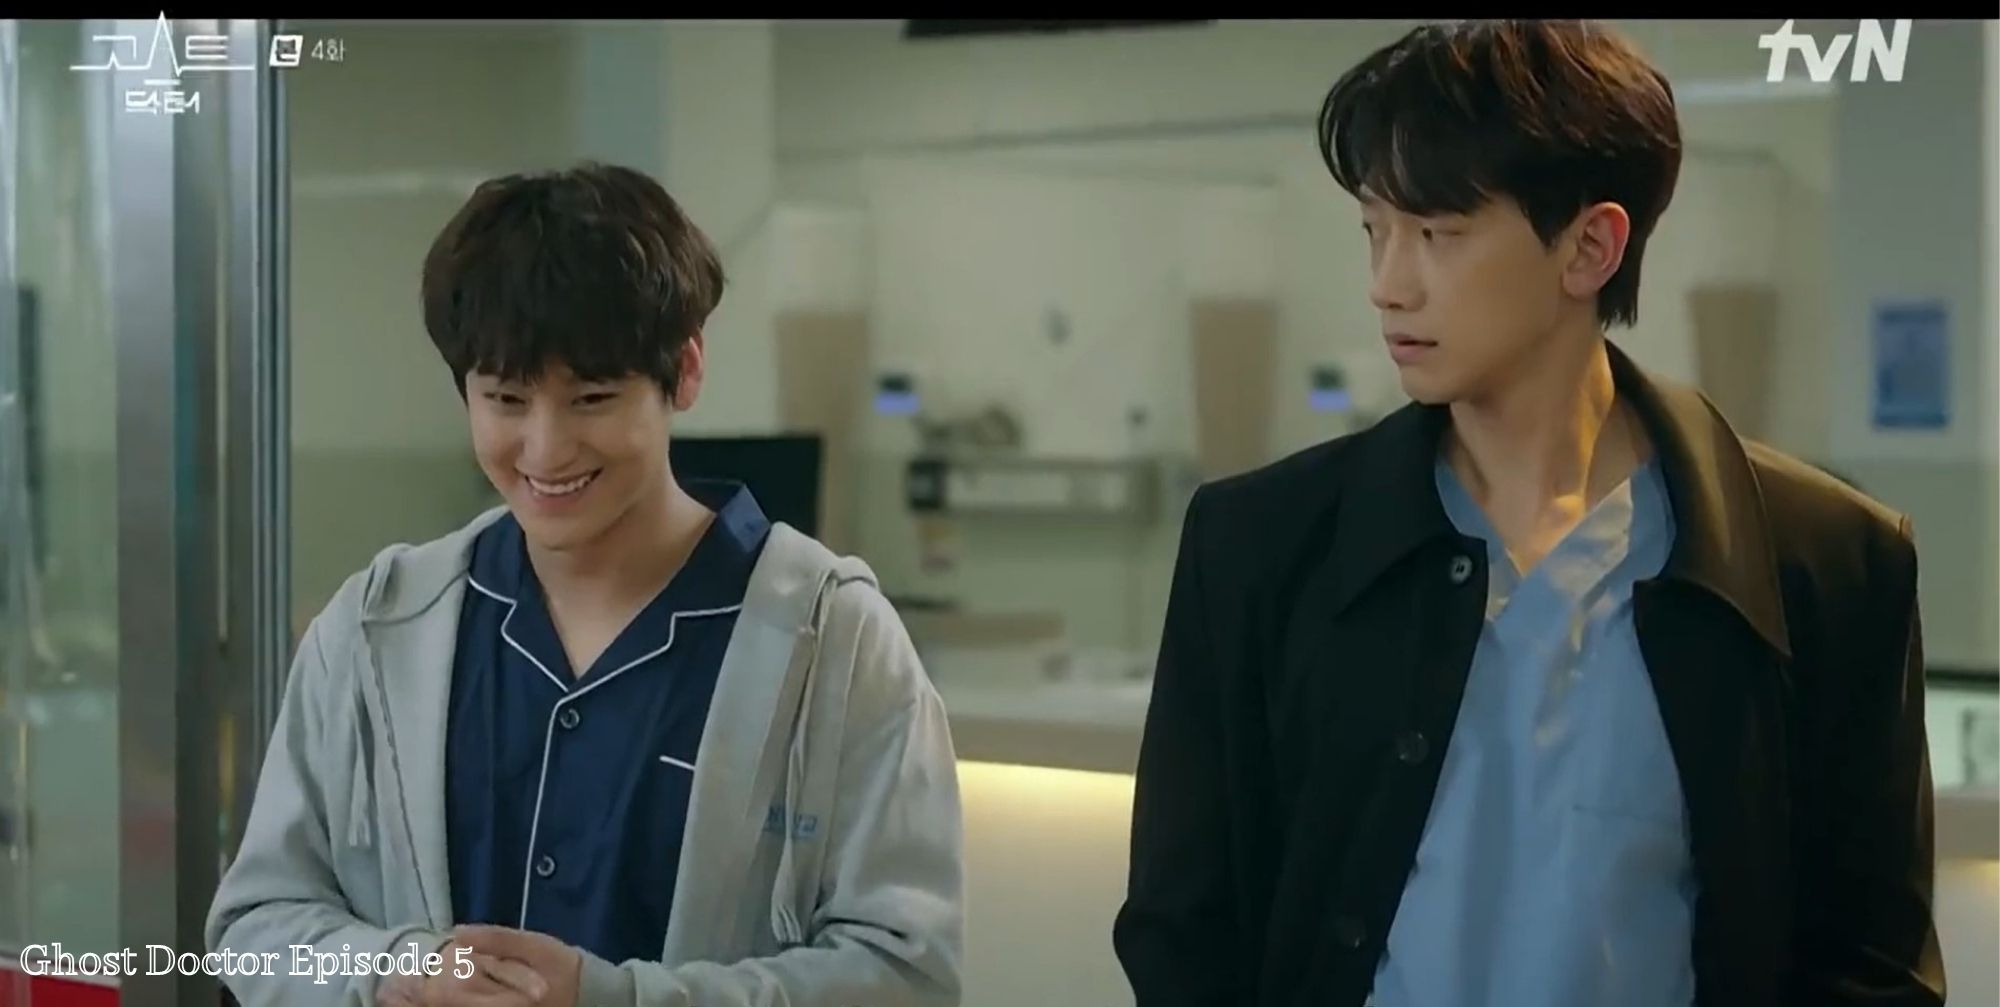 ‘Ghost Doctor Episode 5’: Is Seung Tak Finally Agreeing to Work with Cha Young Min?